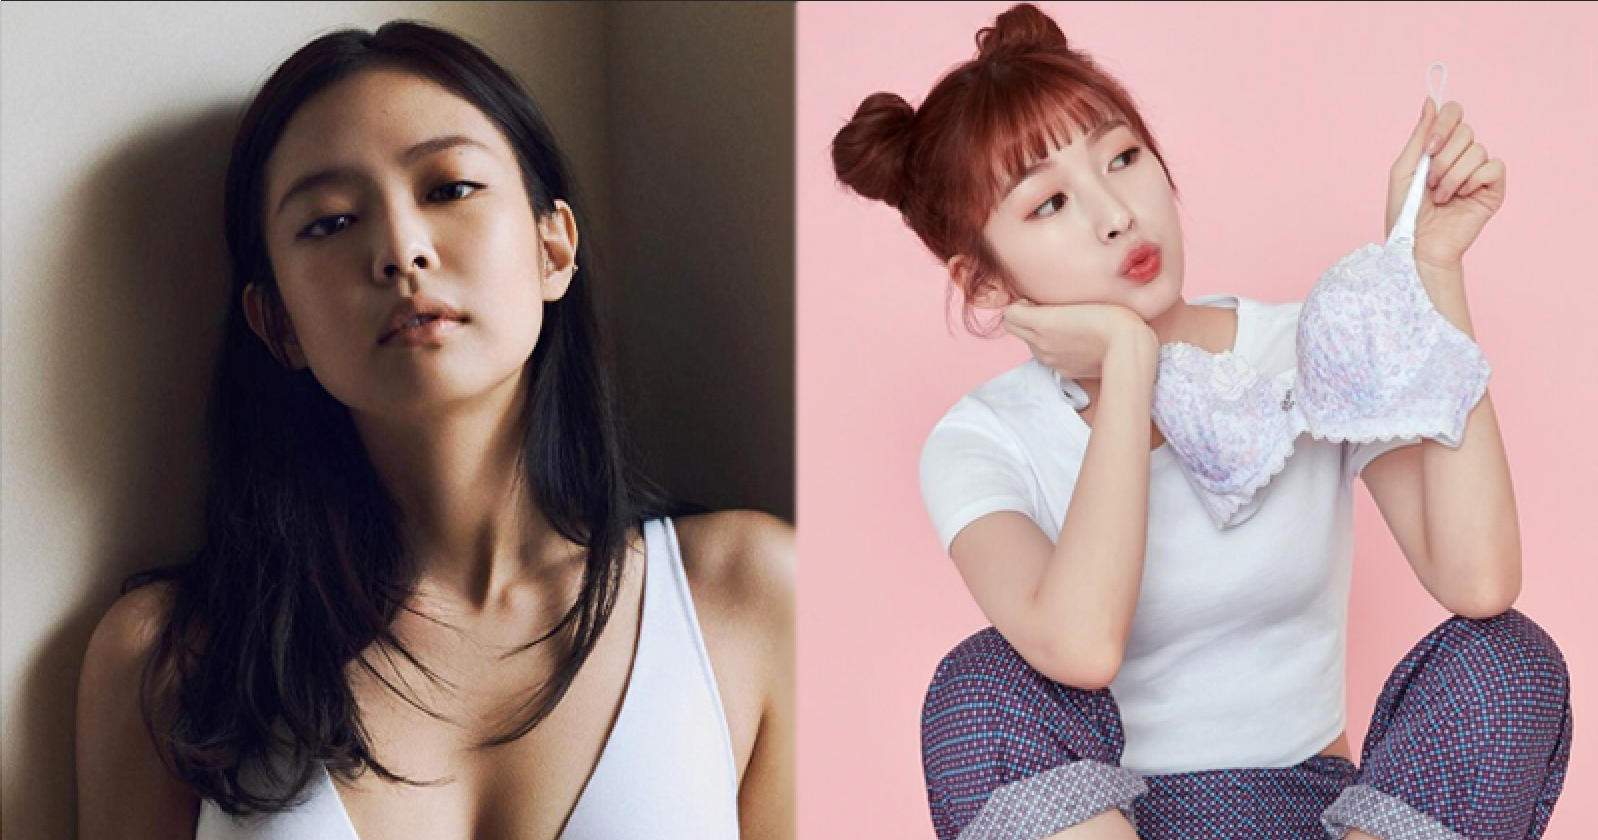 These 3 Female Idol-Models for Underwear Brands But Slayed In Such Different Styles